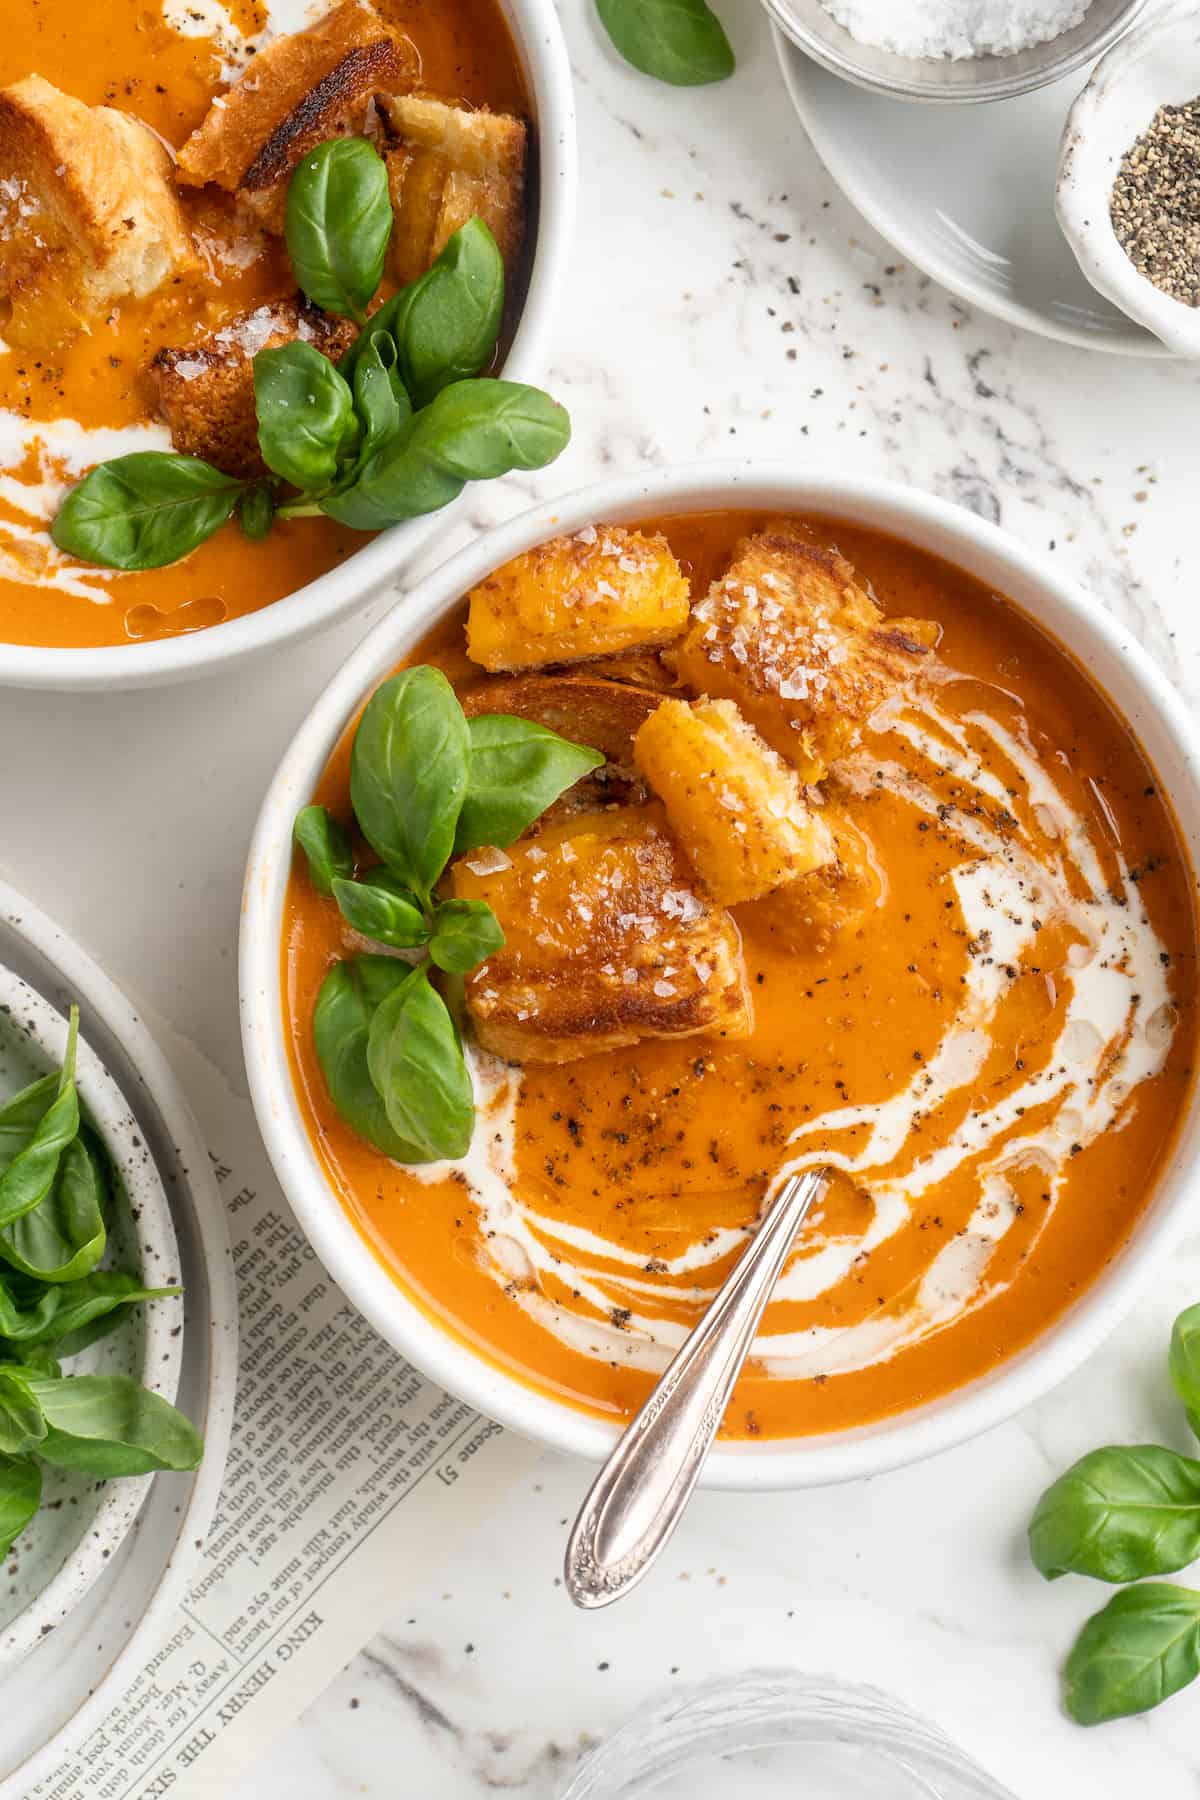 Overhead view of creamy tomato soup with cheesy croutons in bowls